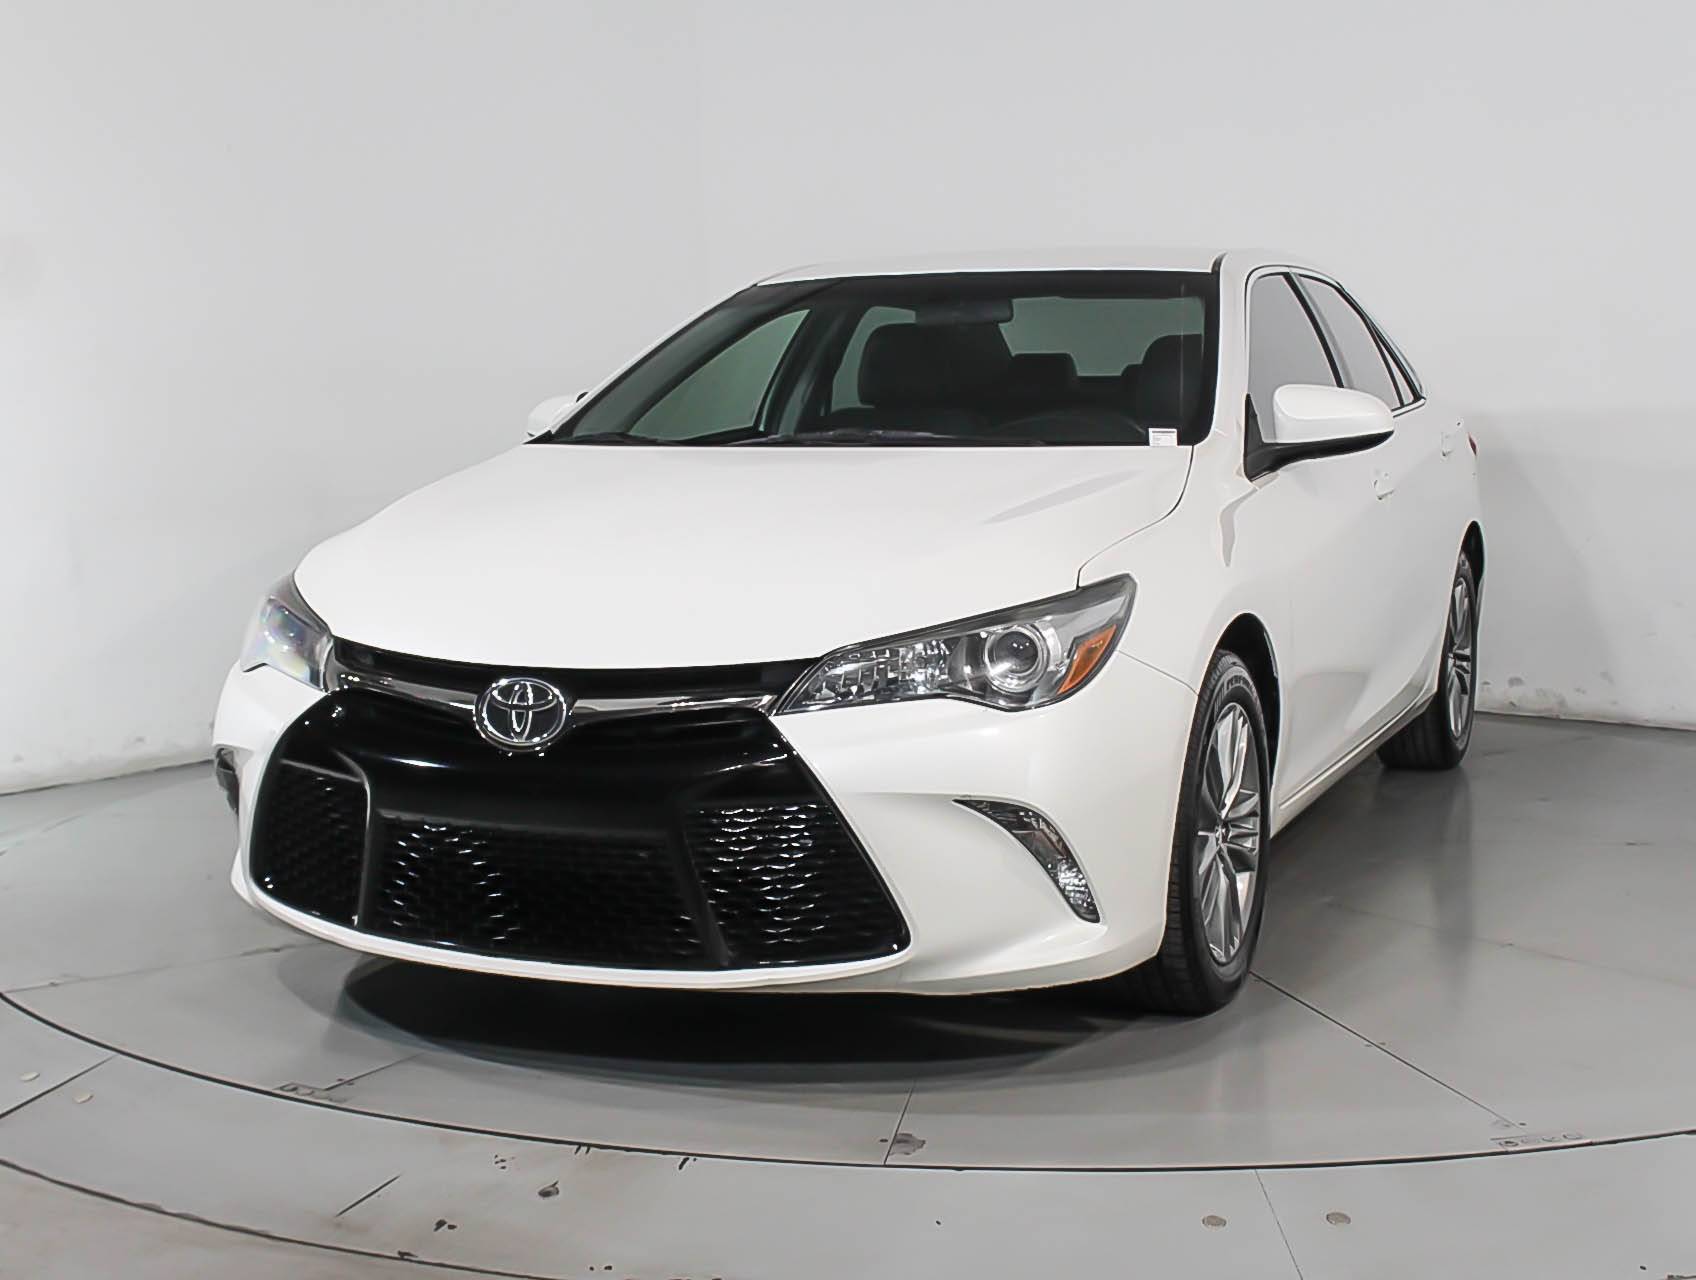 Florida Fine Cars - Used TOYOTA CAMRY 2015 WEST PALM Se